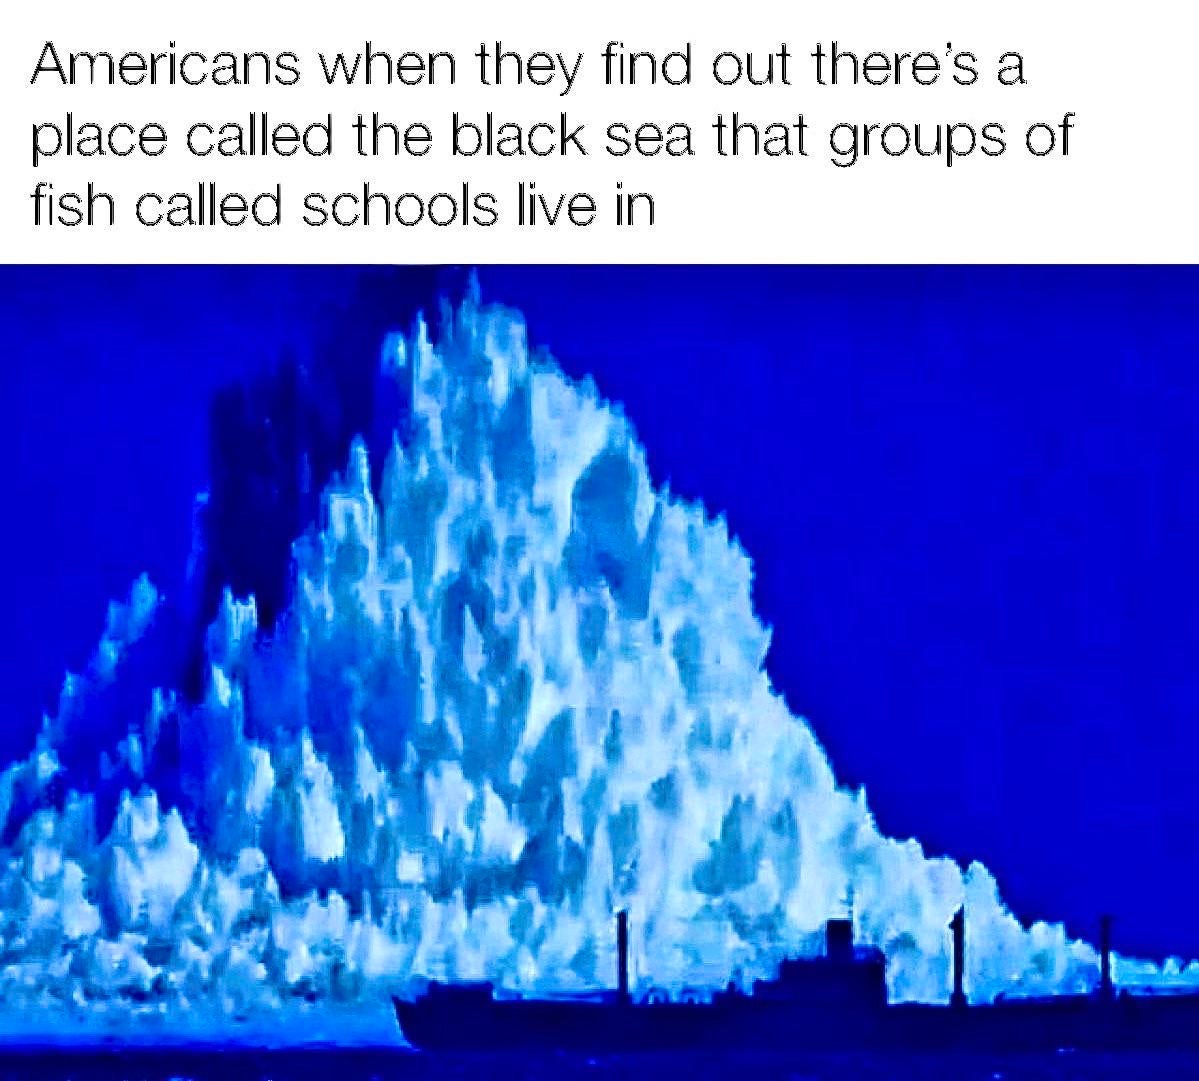 dank meme - lituya bay megatsunami - Americans when they find out there's a place called the black sea that groups of fish called schools live in